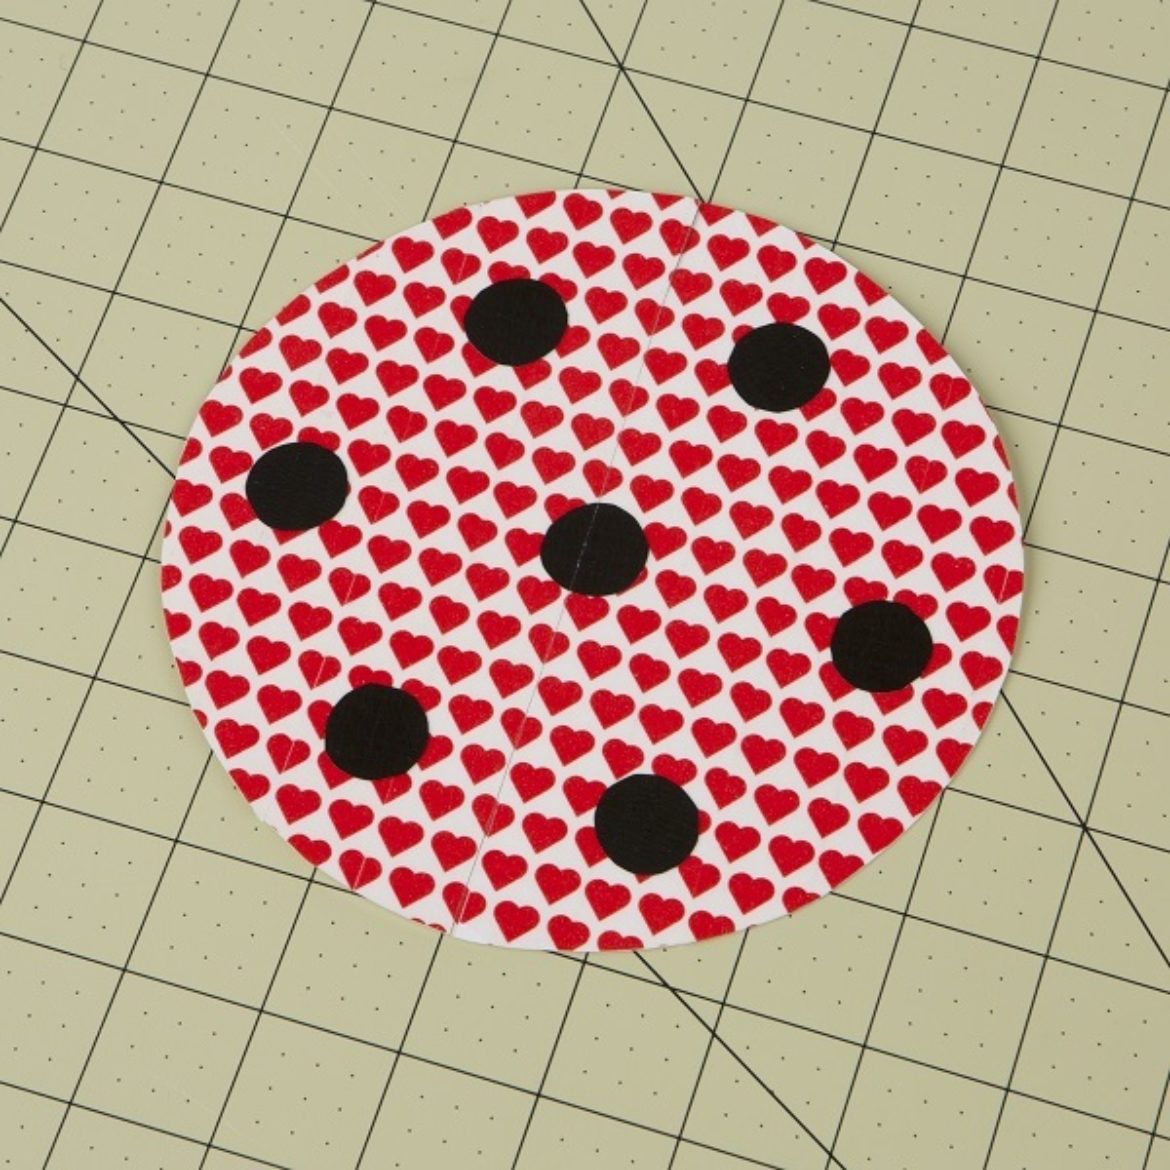 Spots from previous step attached to the circle from step 2